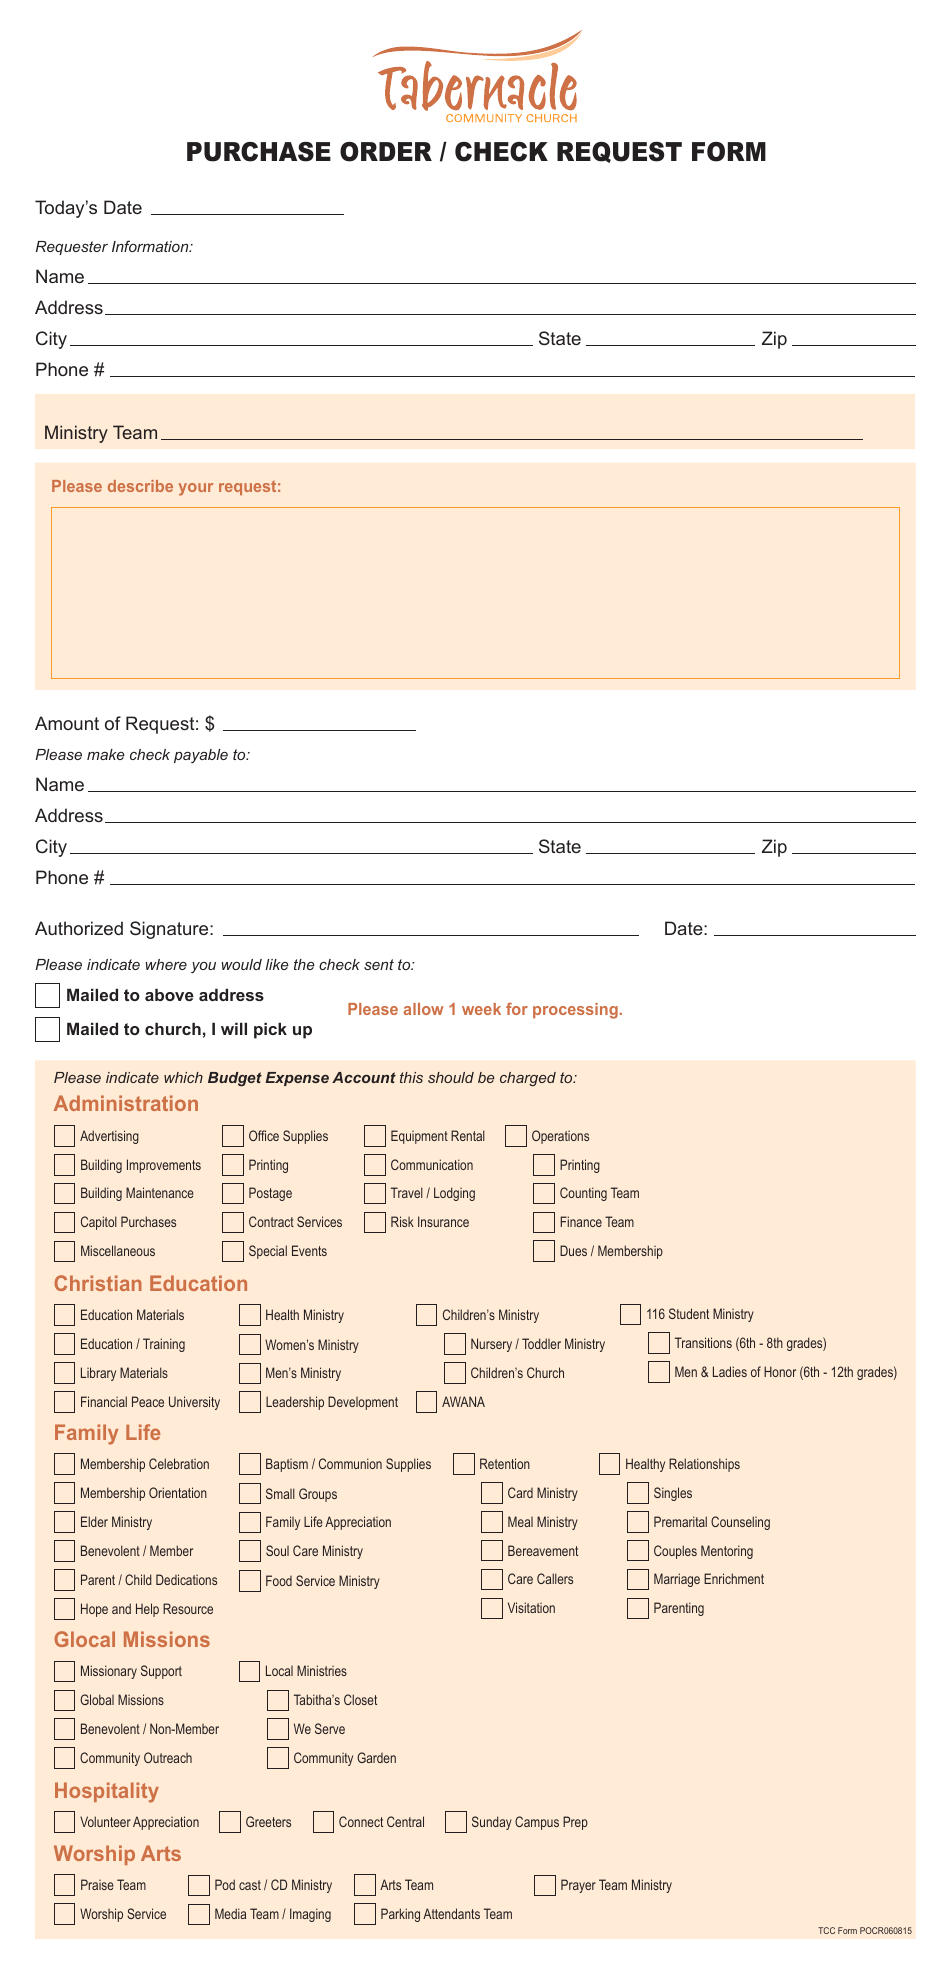 Purchase Order Check Request Form Tabernacle Community Church Download Fillable Pdf Templateroller